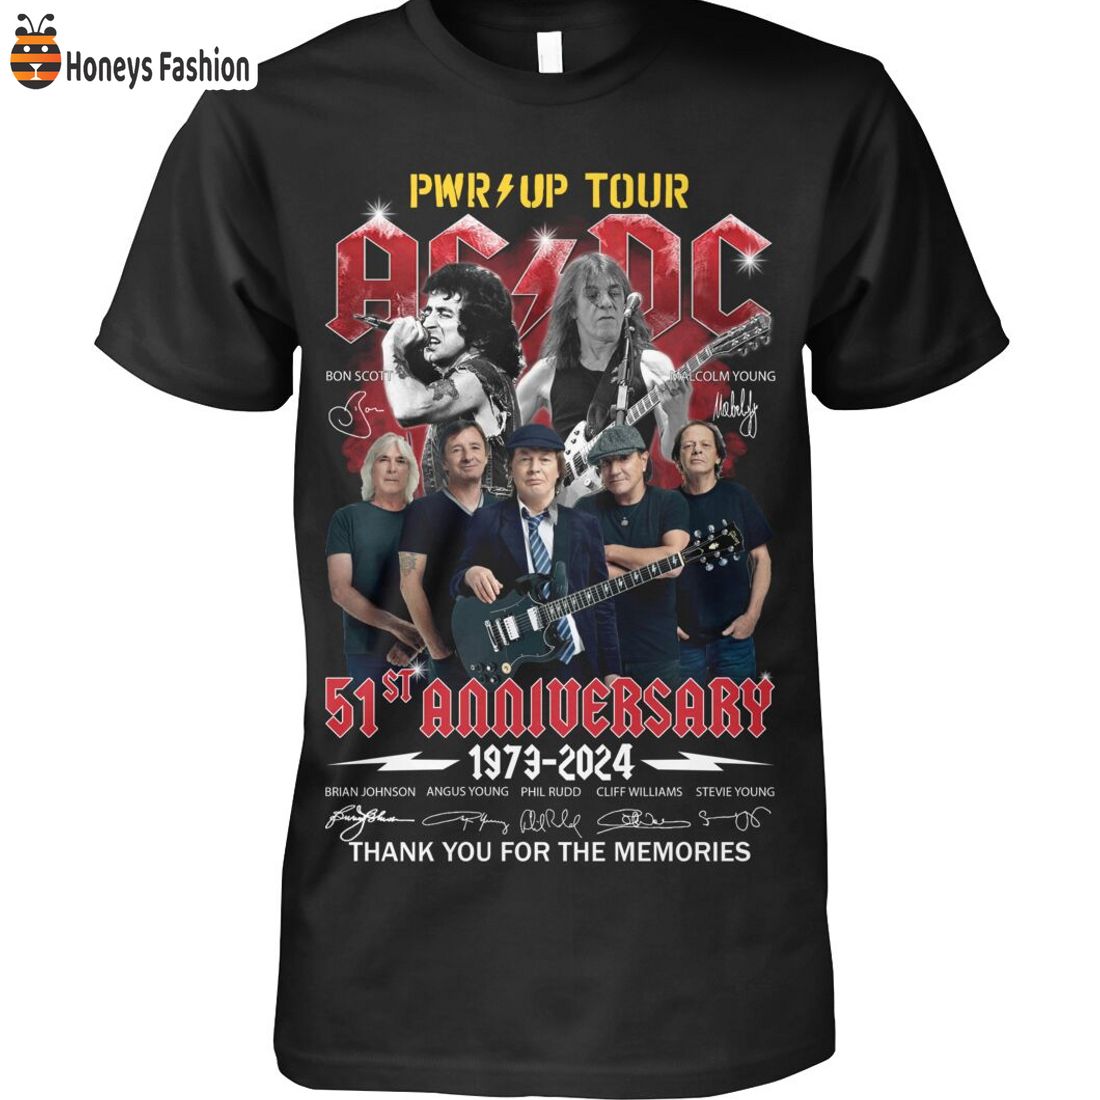 BEST TRENDING ACDC Pwr Up Tour 51st Anniversary 1973 2024 Shirt